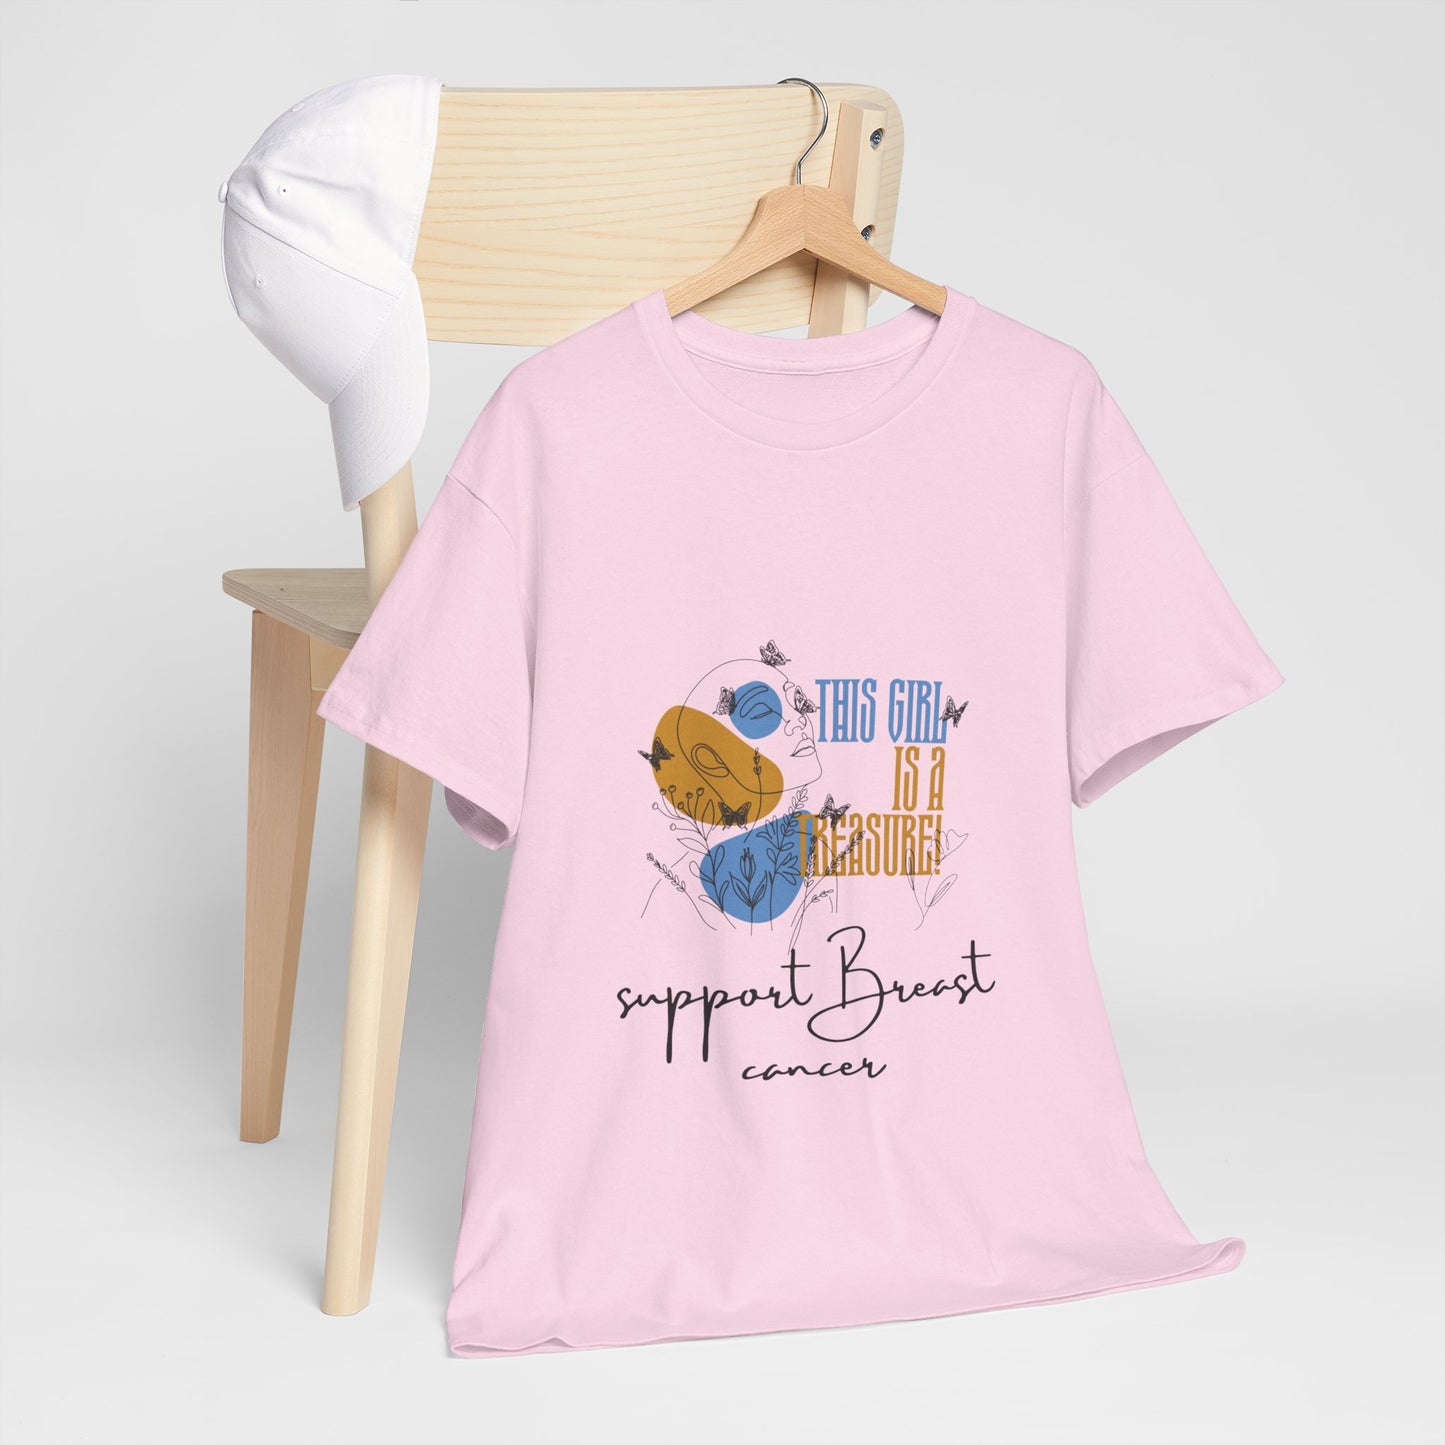 Unisex Heavy Cotton (Support Breast Cancer) T-shirt